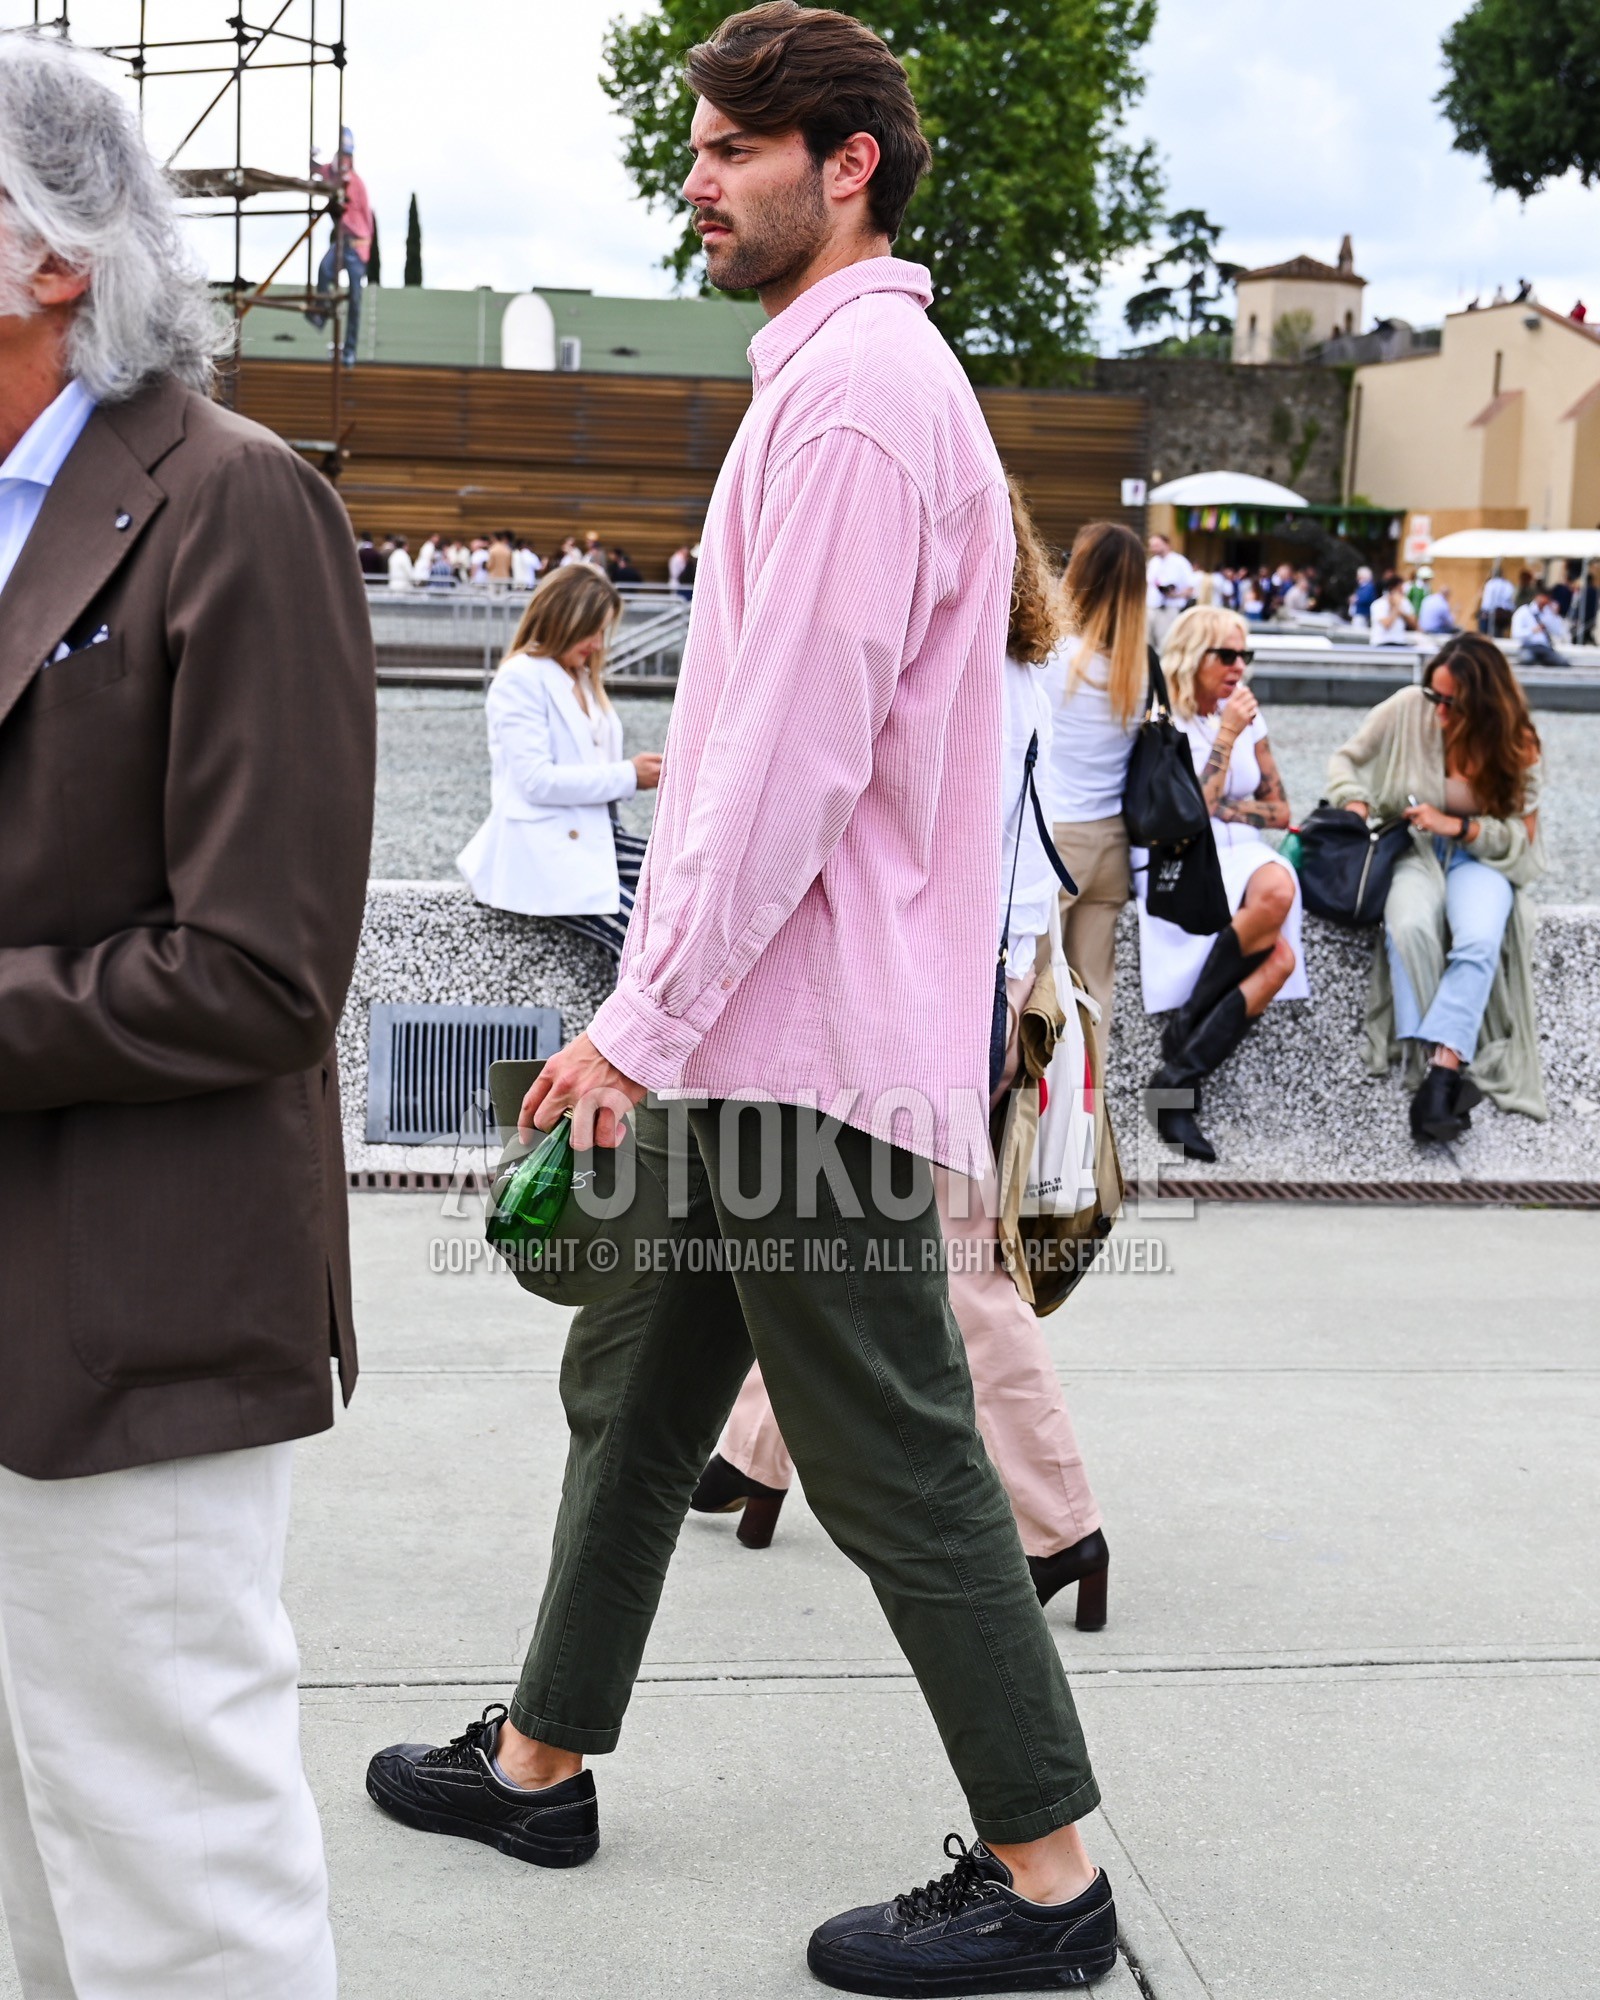 Men's spring summer autumn outfit with pink plain shirt, olive green plain chinos, black low-cut sneakers.